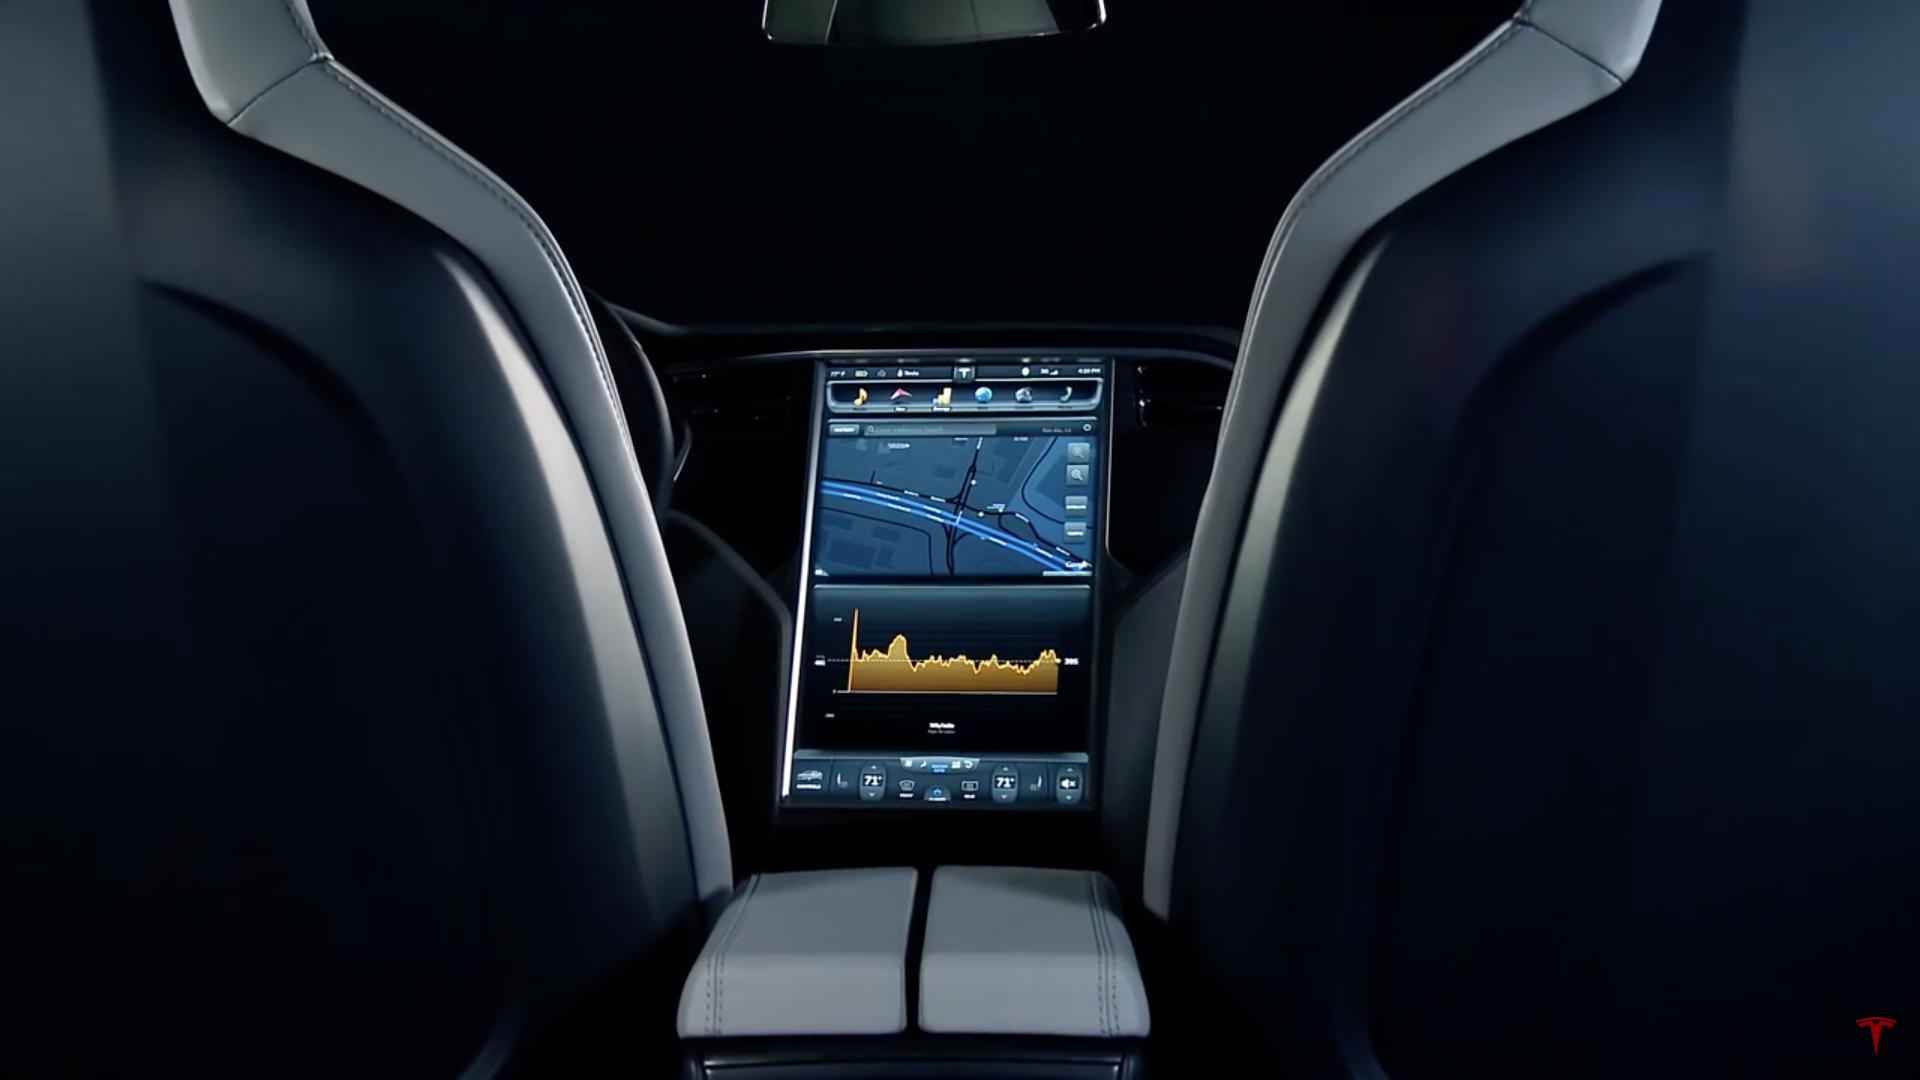 The dash to the Model S for streaming music, navigation and more. Photo by: Tesla Motors / YouTube